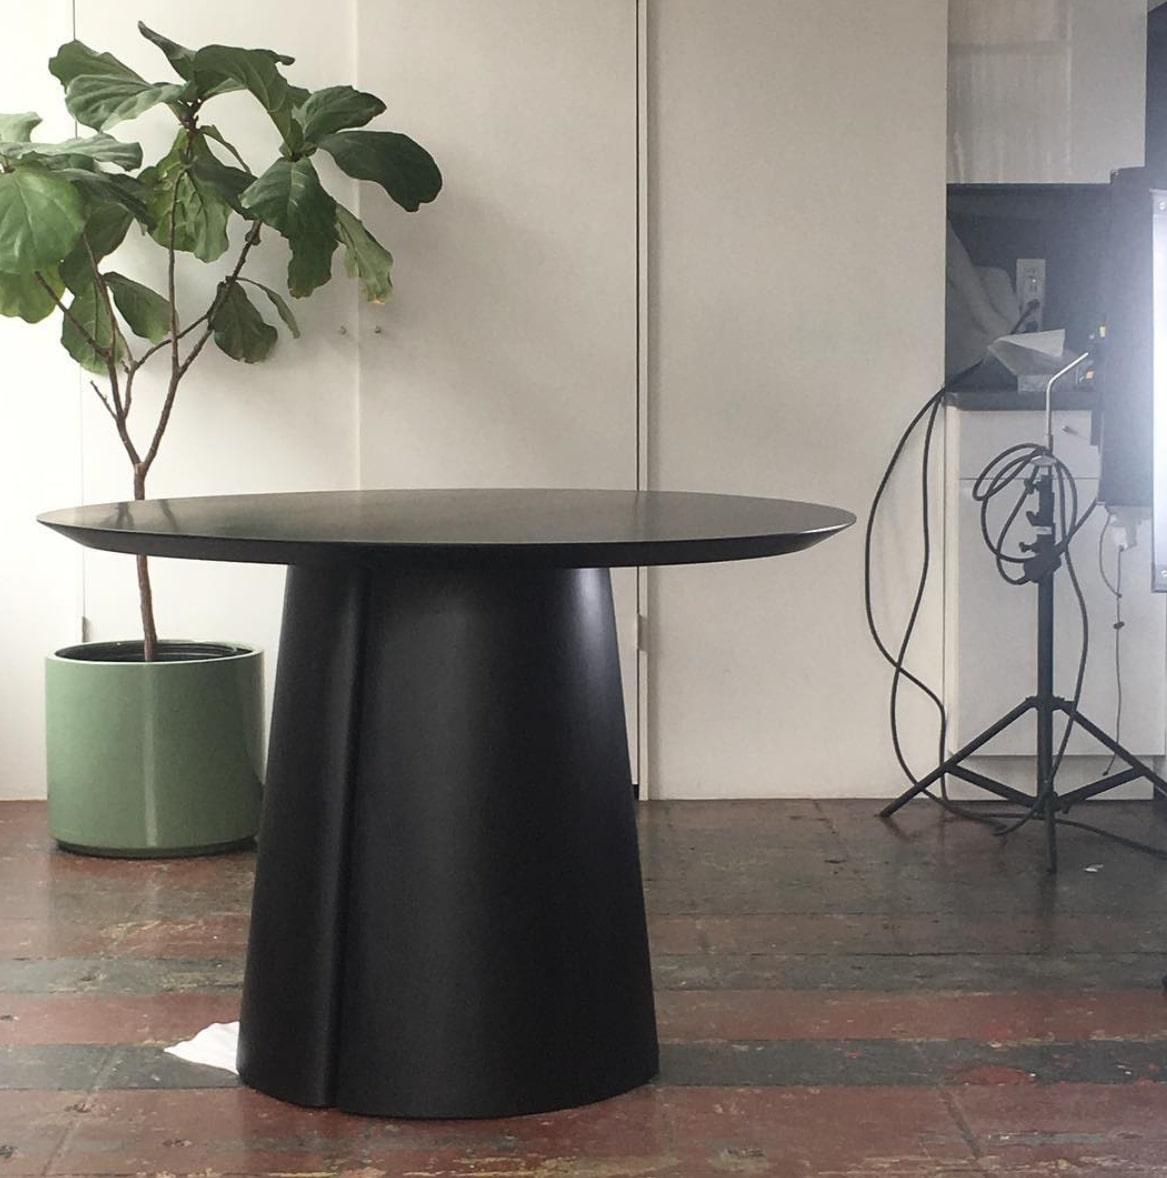 American Column Round Table by Black Table Studio, Black, REP by Tuleste Factory For Sale